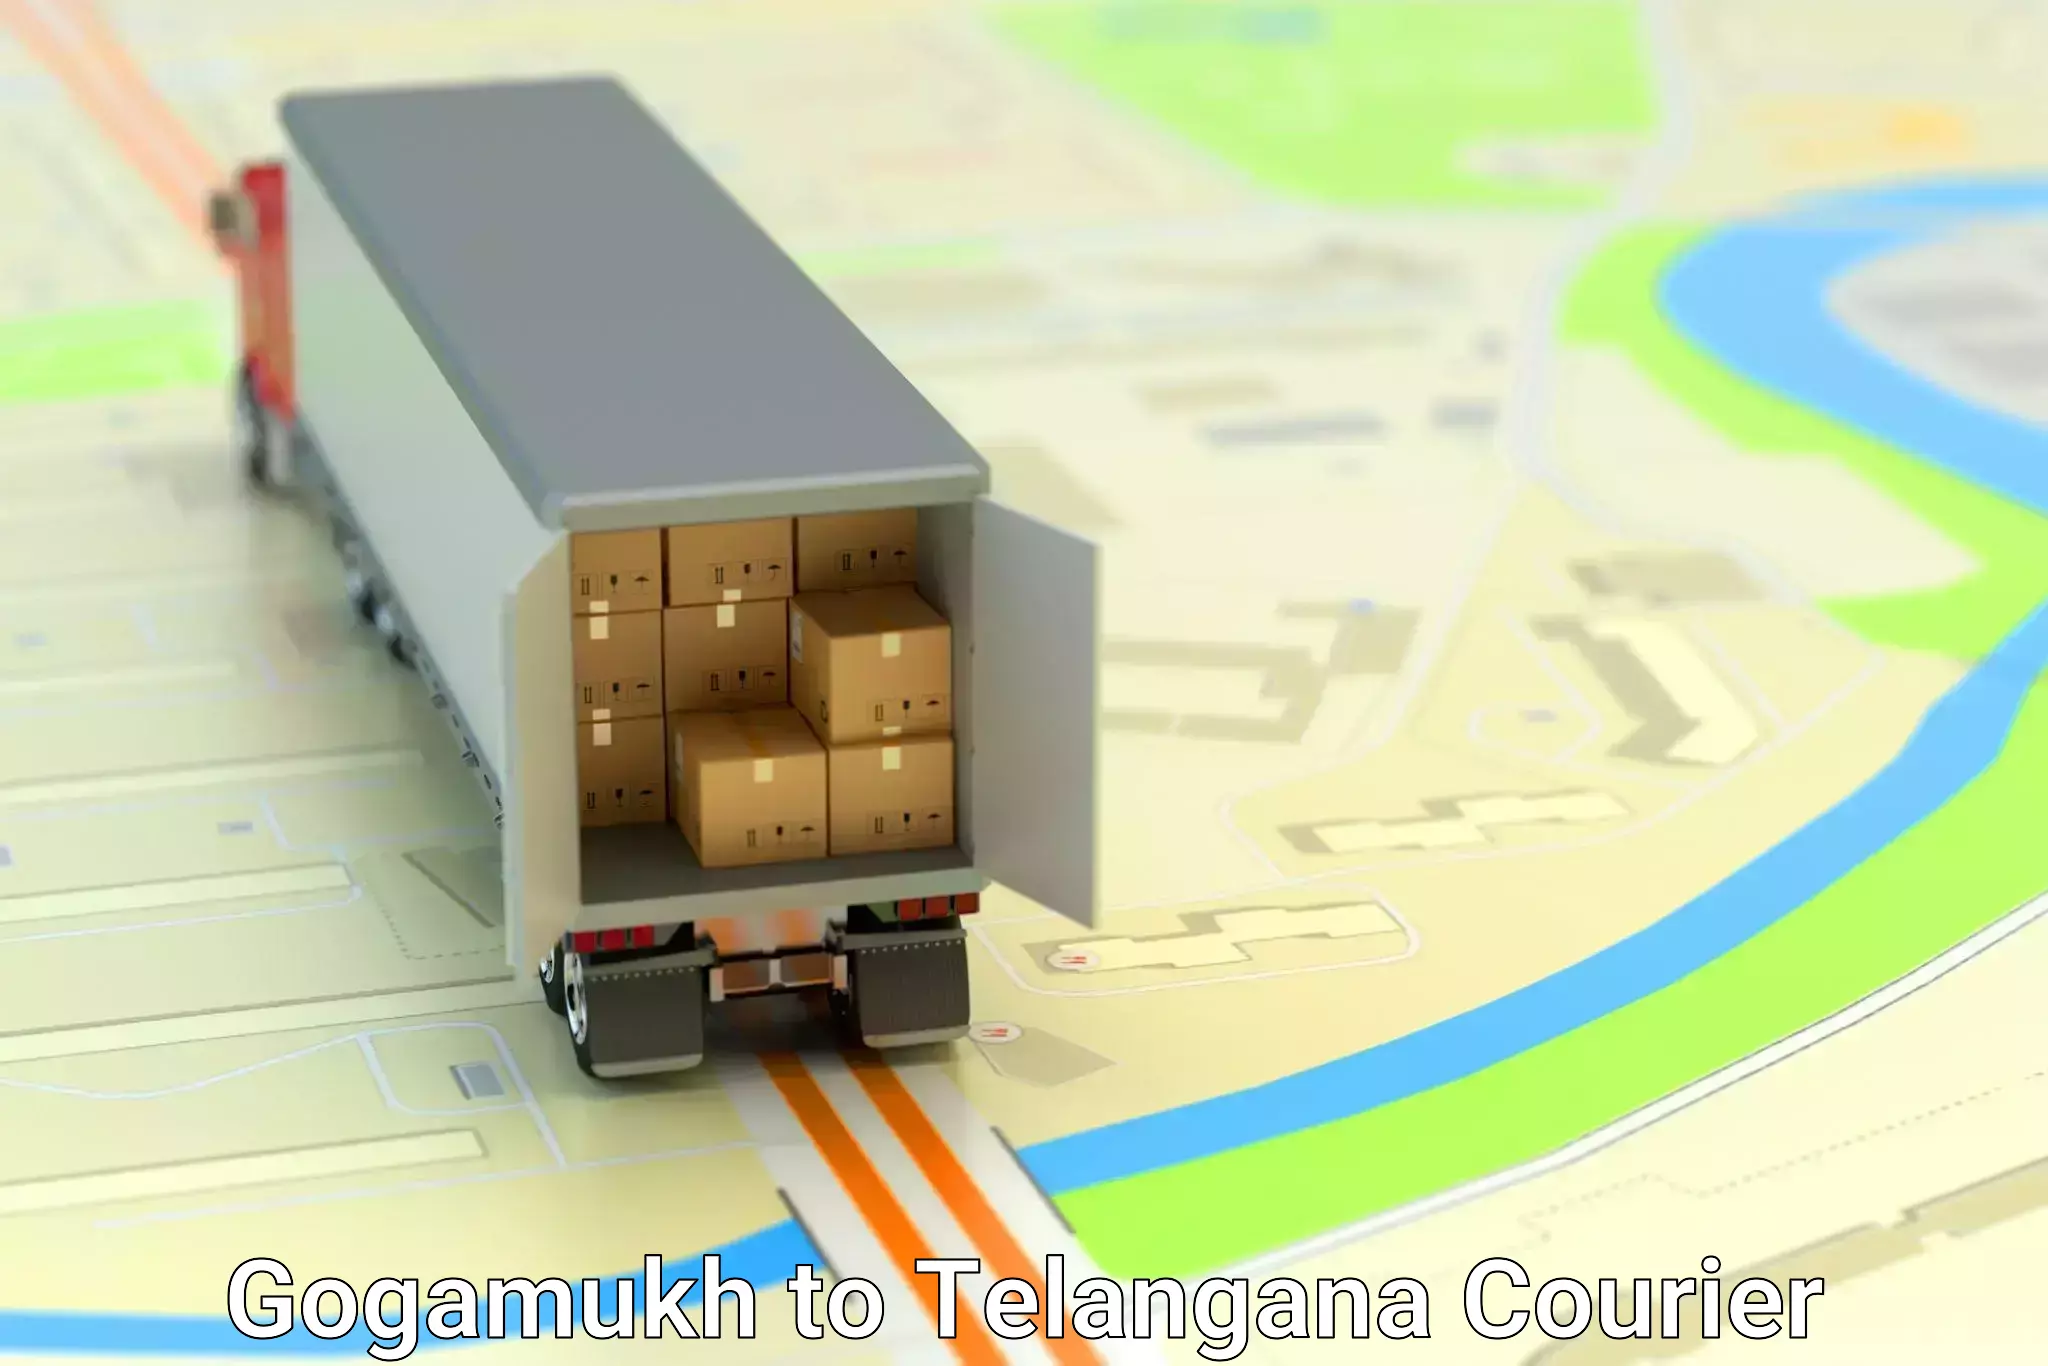 Efficient parcel delivery in Gogamukh to Hyderabad